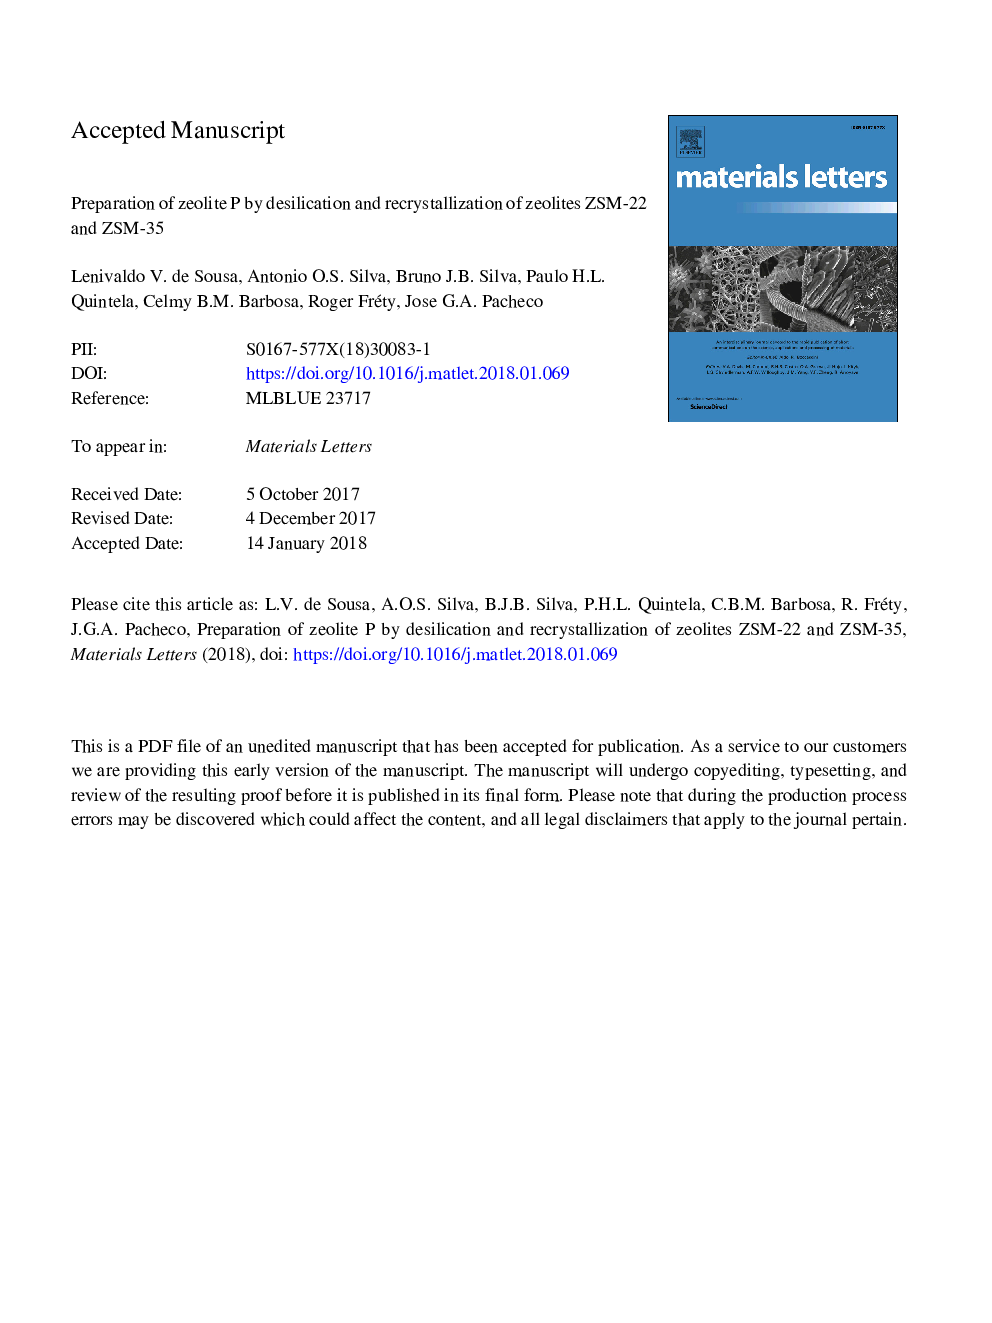 Preparation of zeolite P by desilication and recrystallization of zeolites ZSM-22 and ZSM-35